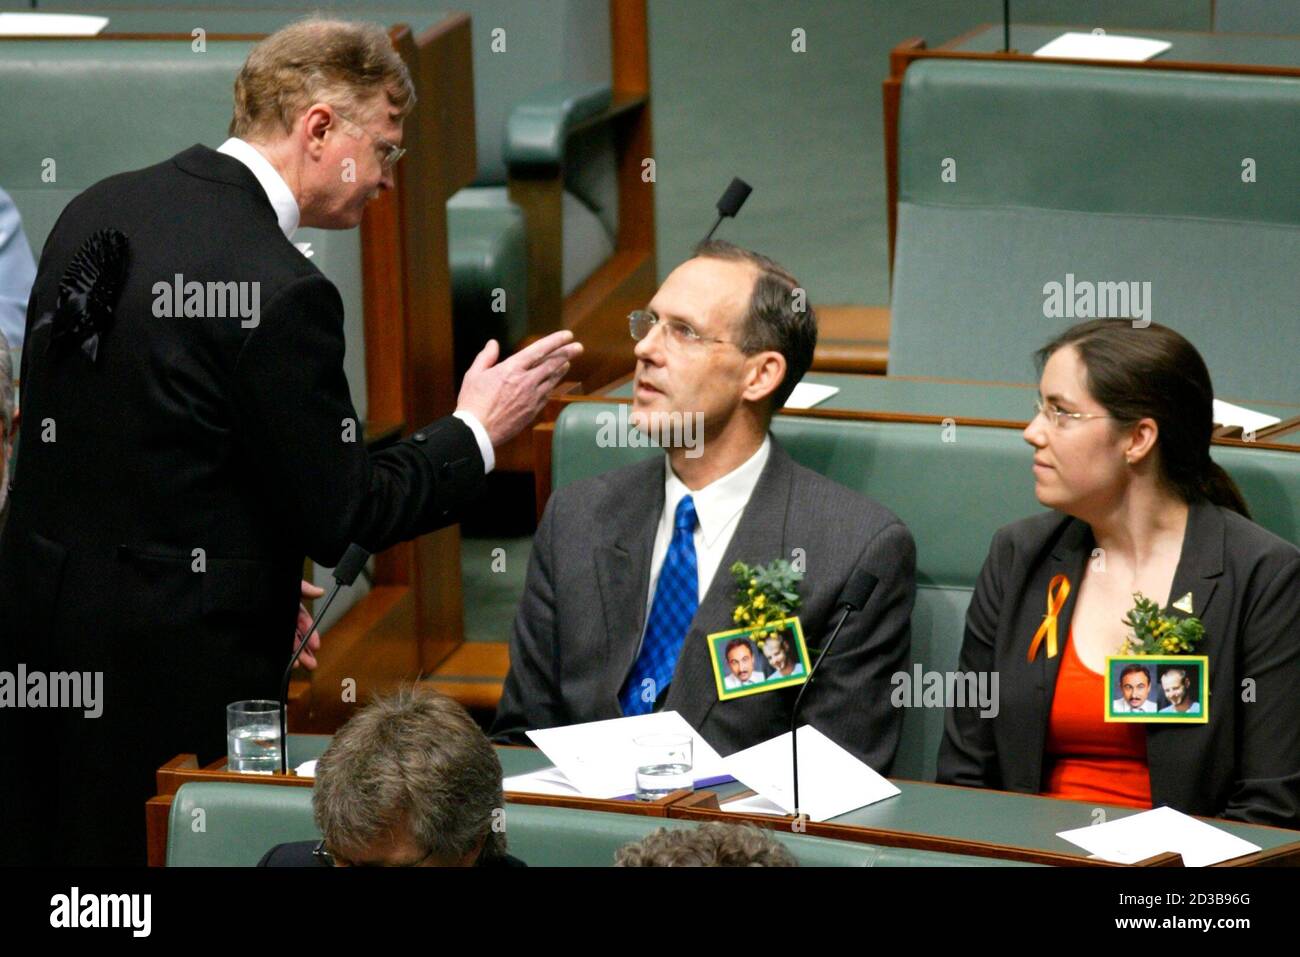 Australian Green Party senators Bob Brown (C) and Kerry Nettle (R) are  warned by an official as they interrupt a speech to Australia's Parliament  by U.S. President George W. Bush in Canberra,